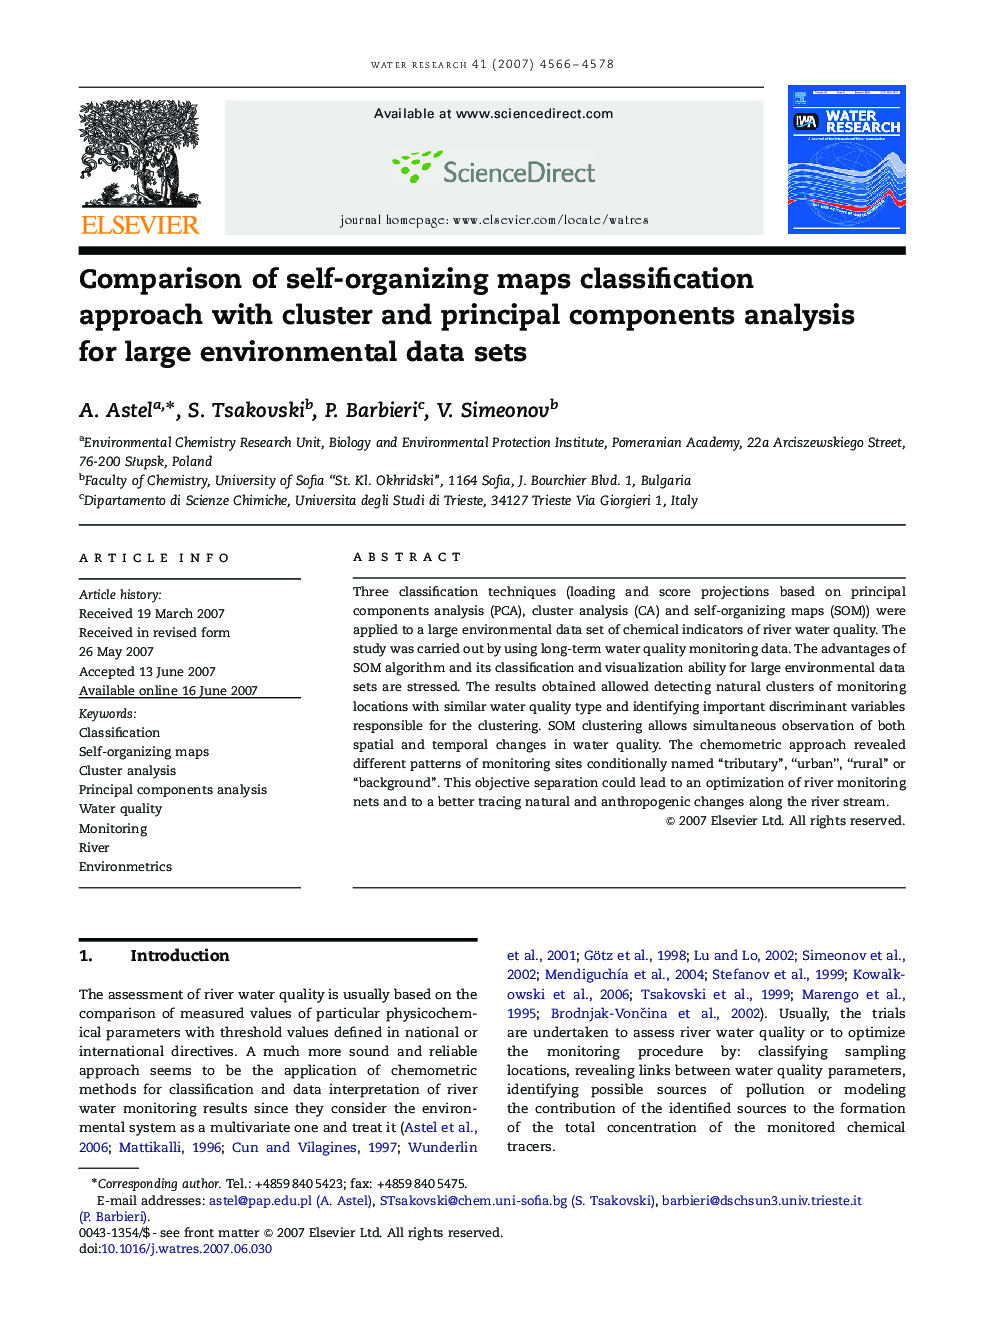 Comparison of self-organizing maps classification approach with cluster and principal components analysis for large environmental data sets